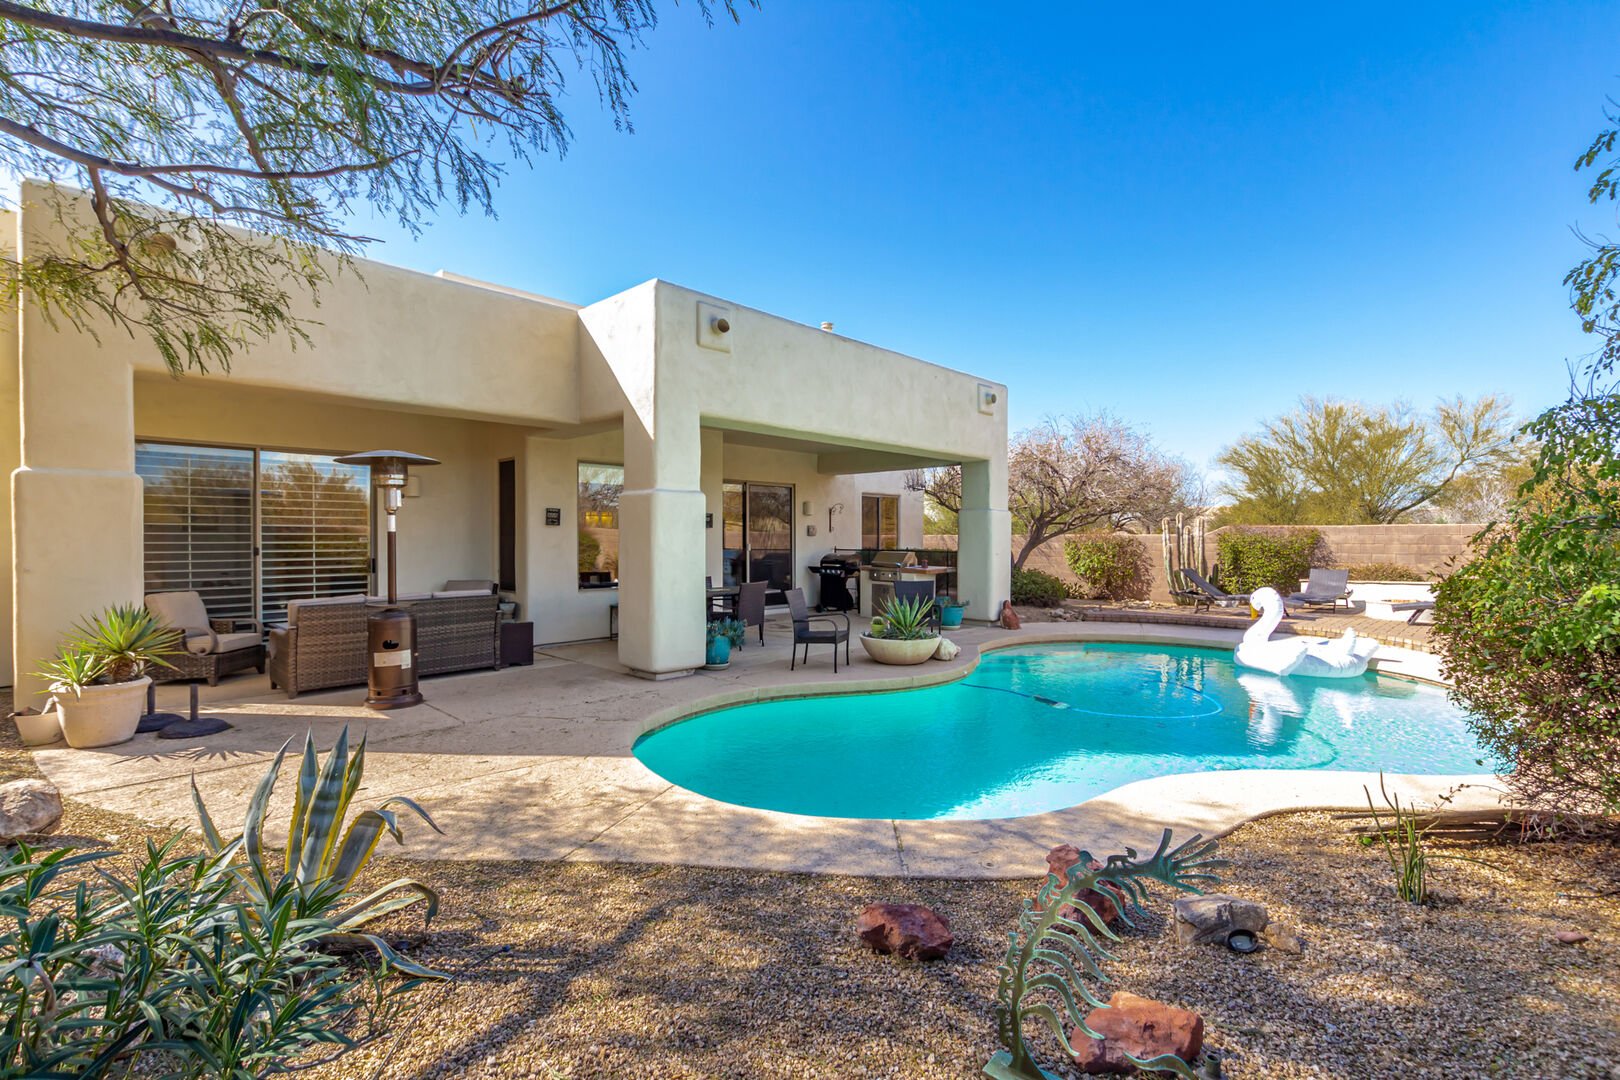 Private Backyard featuring Sparkling Blue Pool, Sun Loungers, Fire Pit, BBQ Grill, and Covered Patio with Space Heater and Lounging Areas.